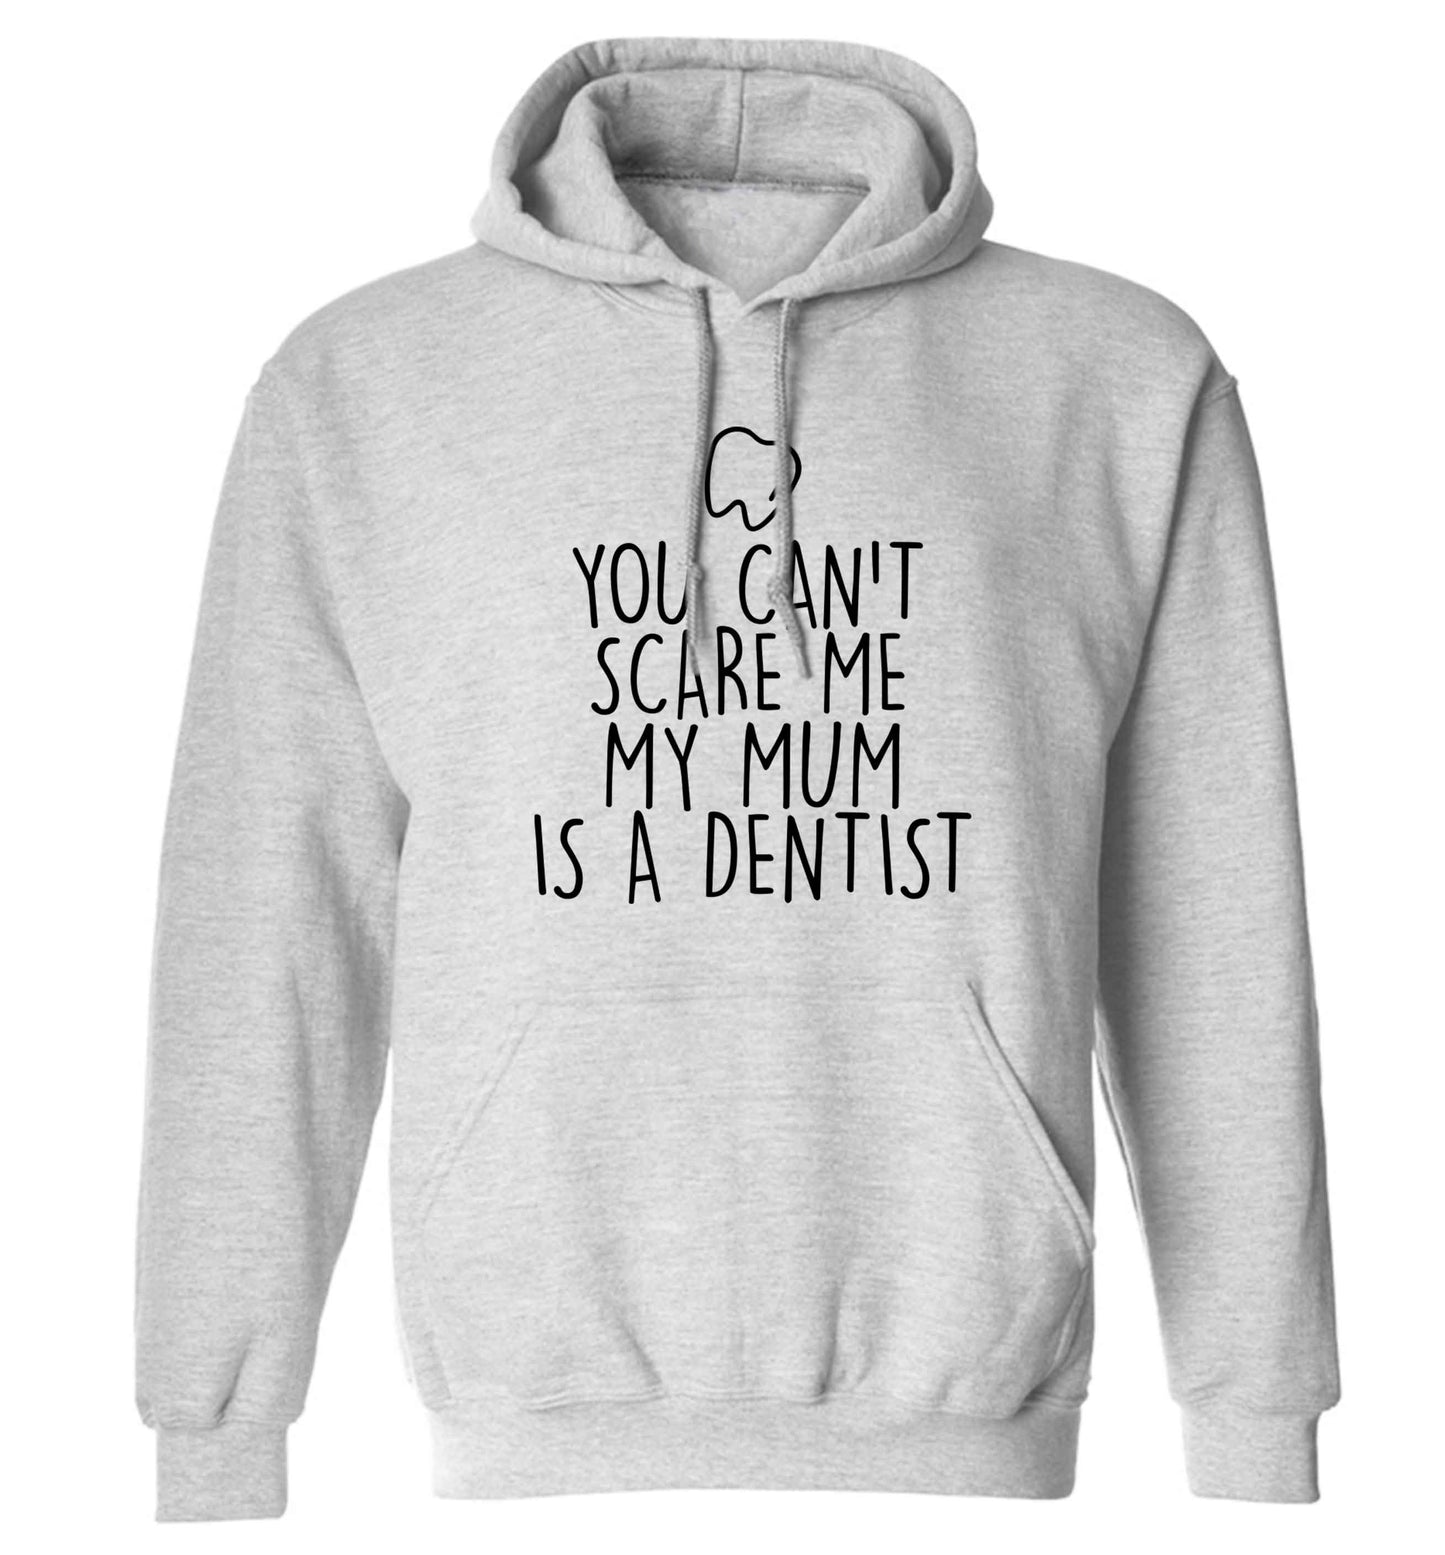 Minty Kisses Tooth Fairy (a) adults unisex grey hoodie 2XL